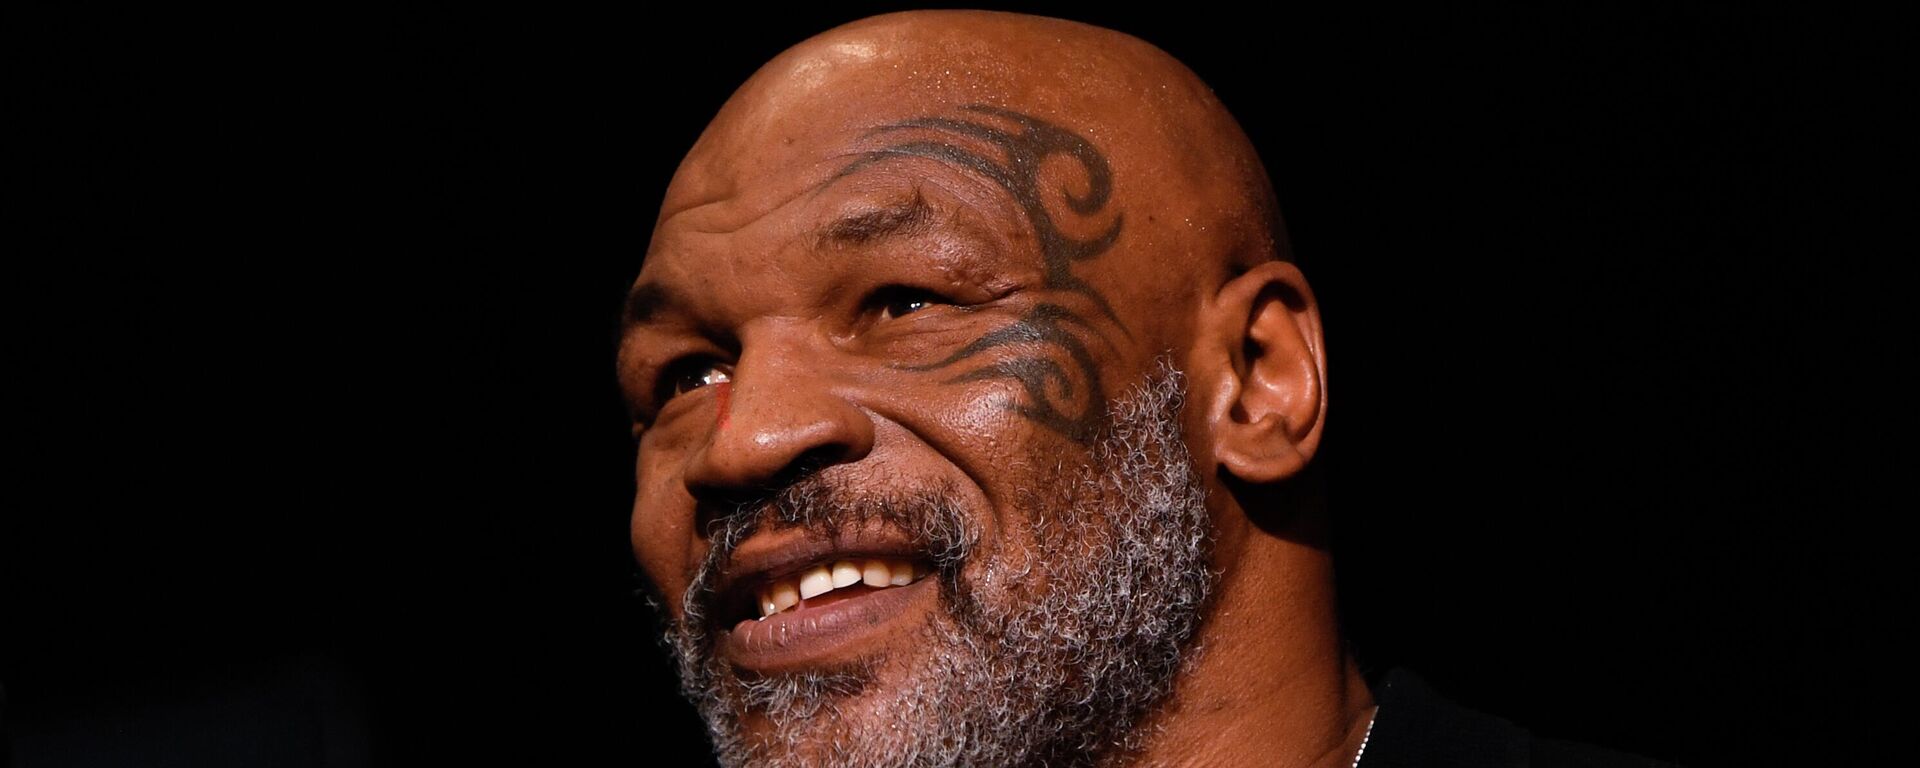 (FILES) In this file photo taken on November 05, 2021, former boxing heavyweight champion Mike Tyson attends the weigh-in for boxers Canelo Alvarez and Caleb Plant in Las Vegas, Nevada. - Sputnik International, 1920, 21.04.2022